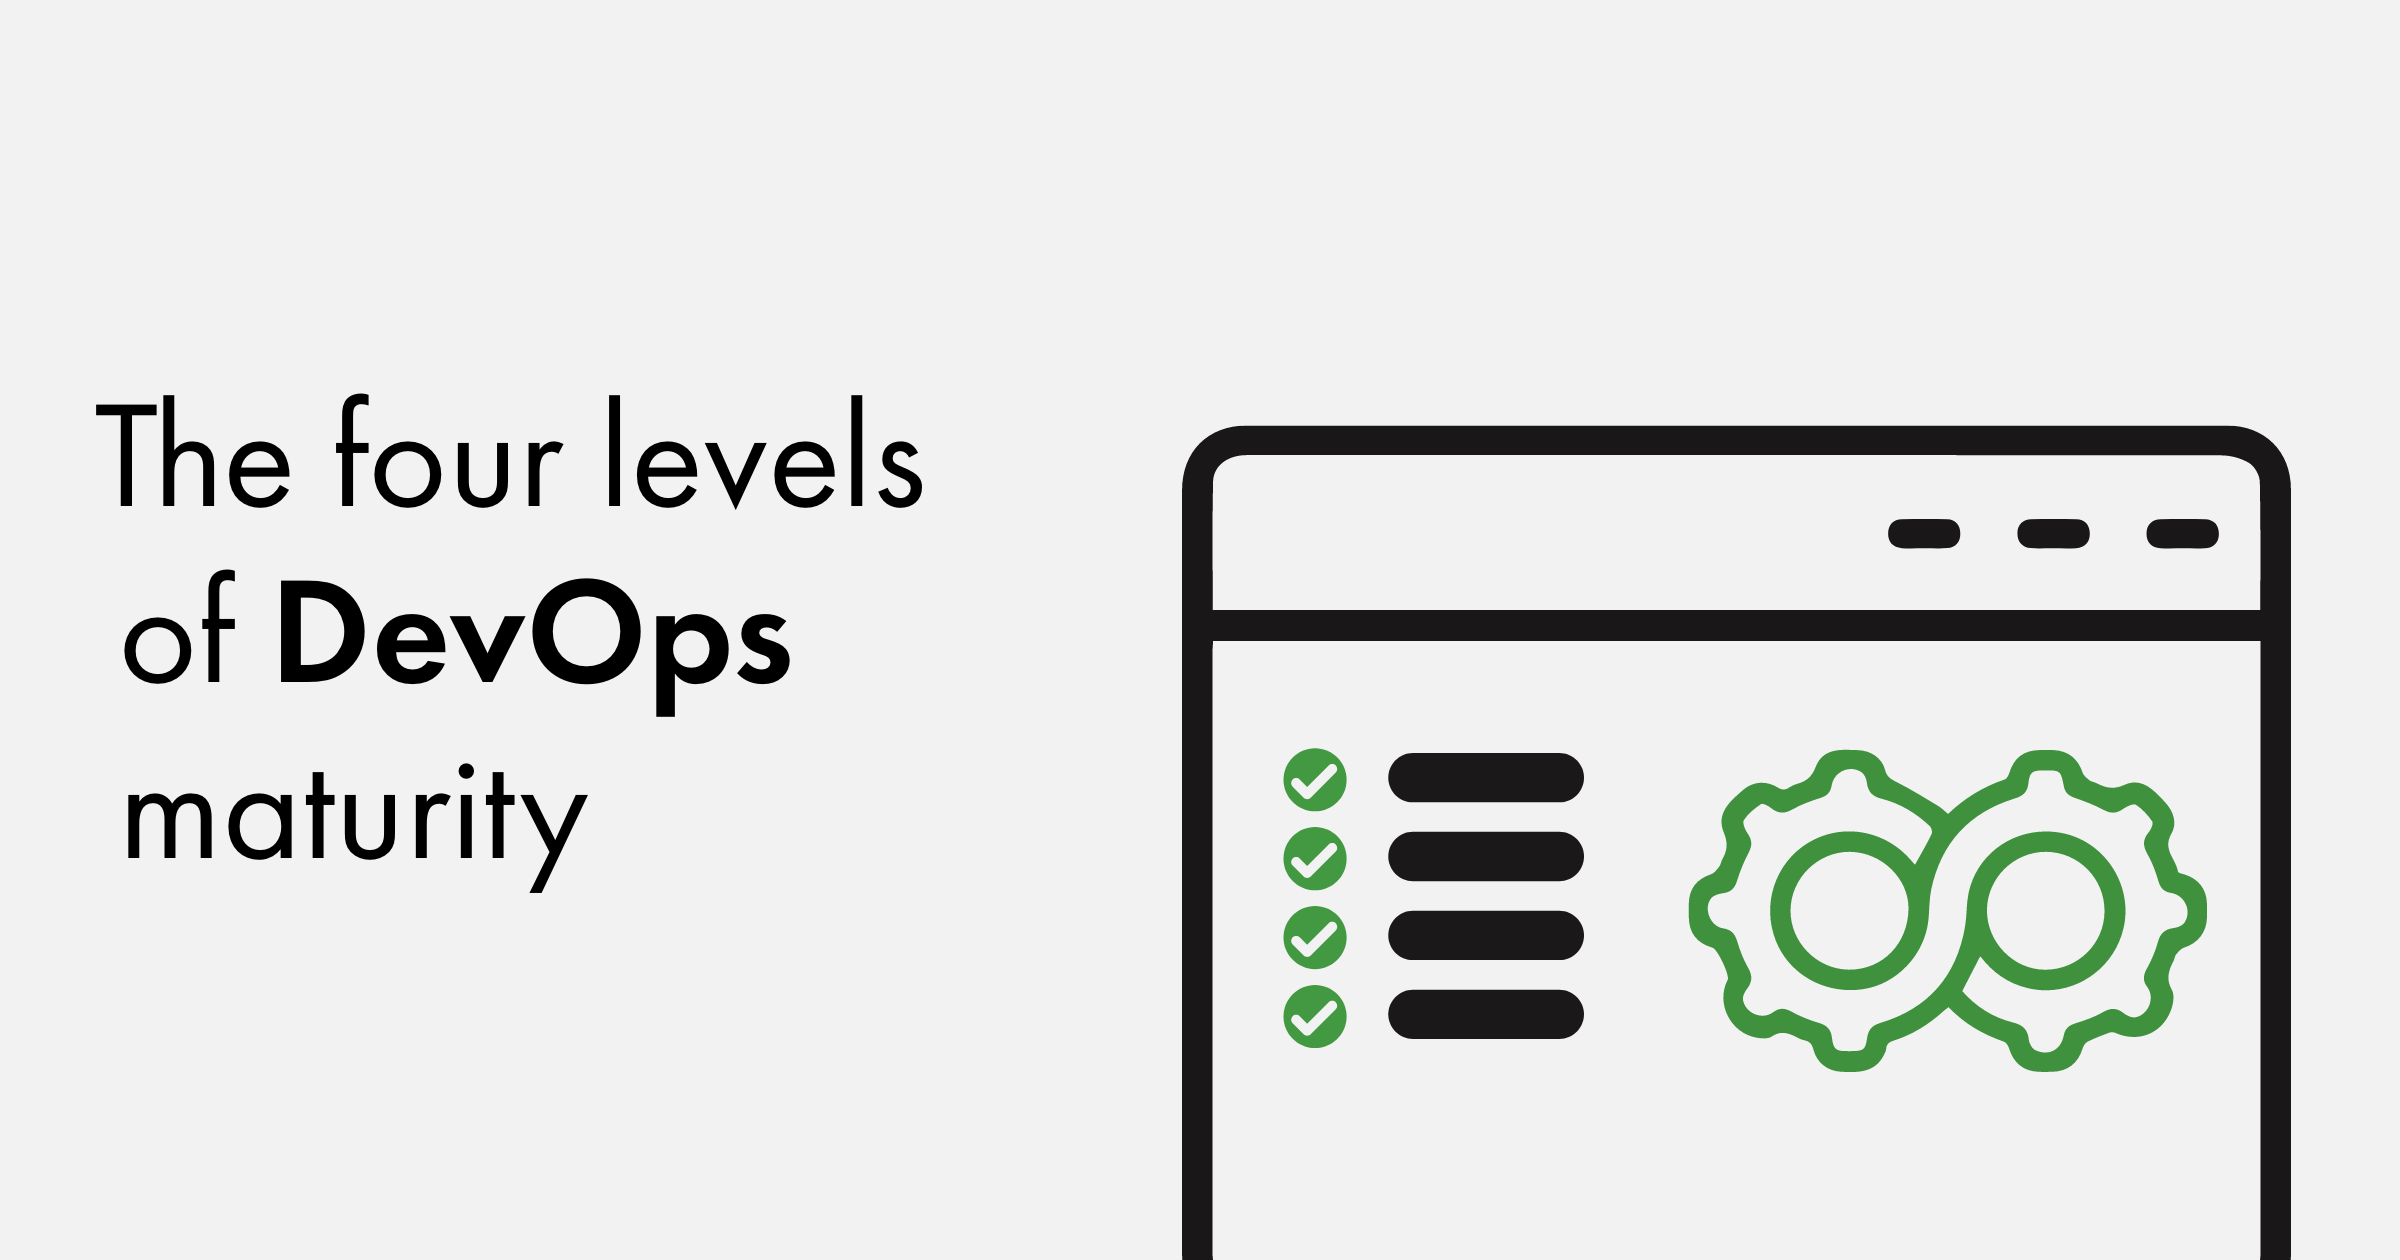 The four levels of DevOps maturity